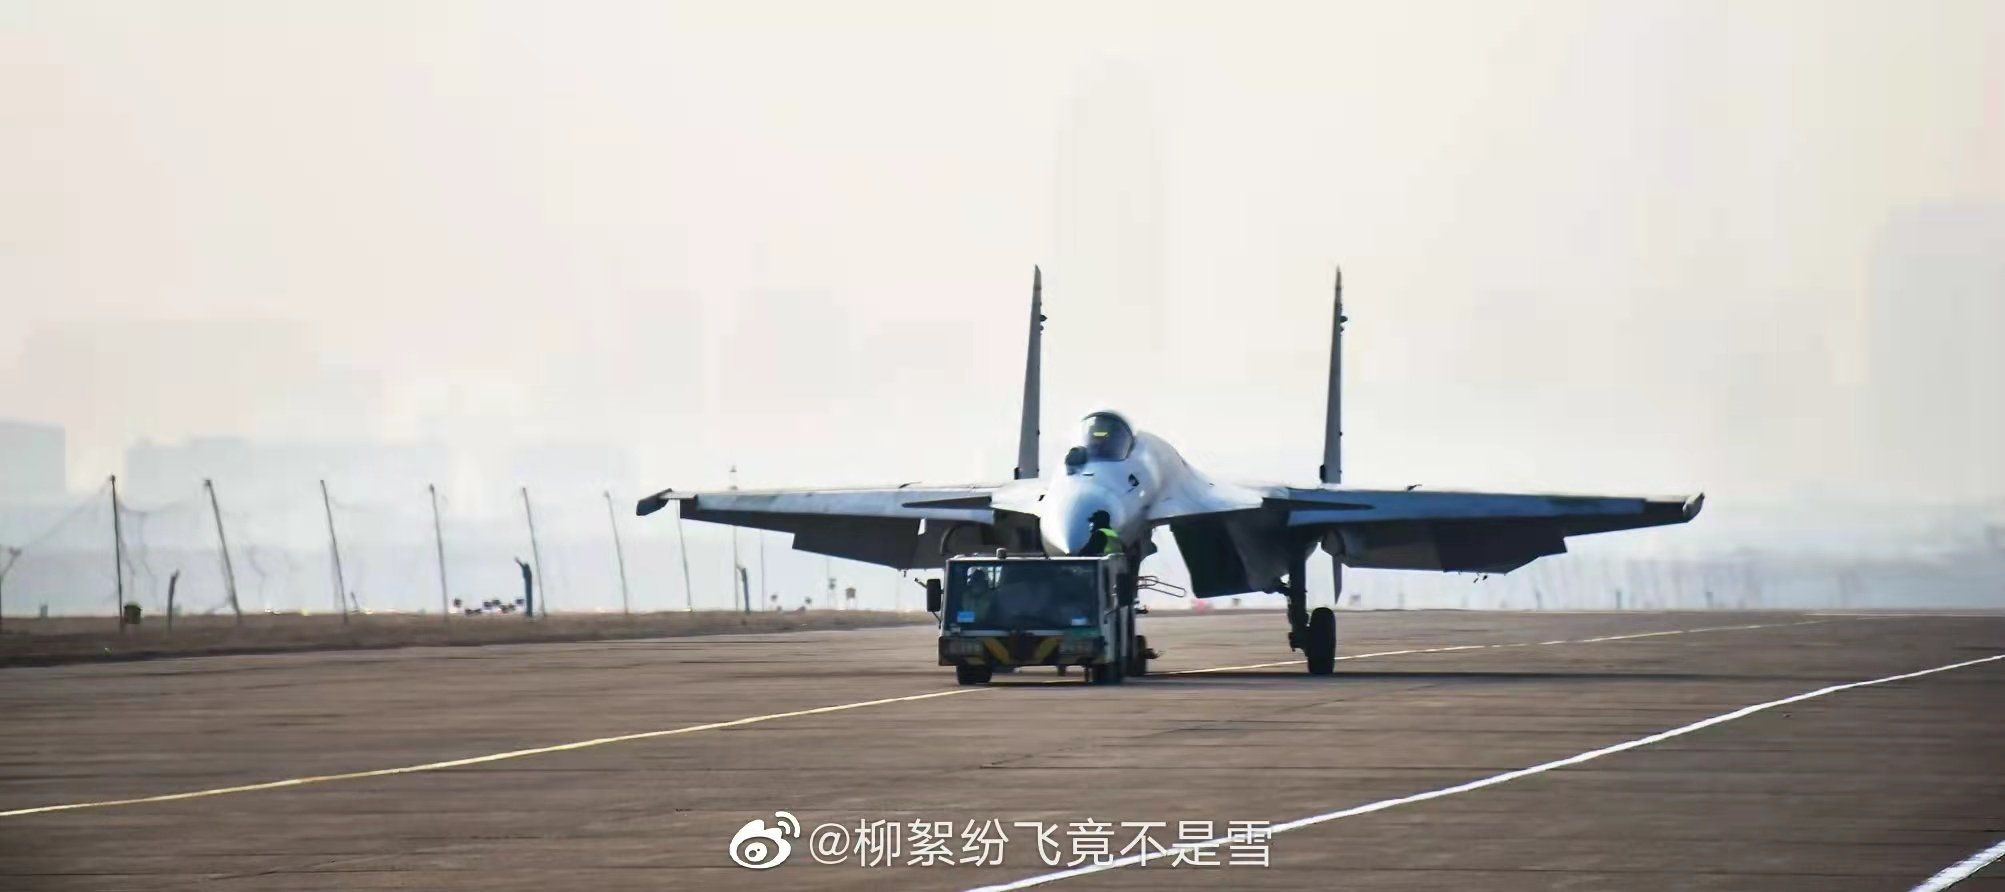 China unveiled an updated J-15 fighter jet for use on aircraft carriers